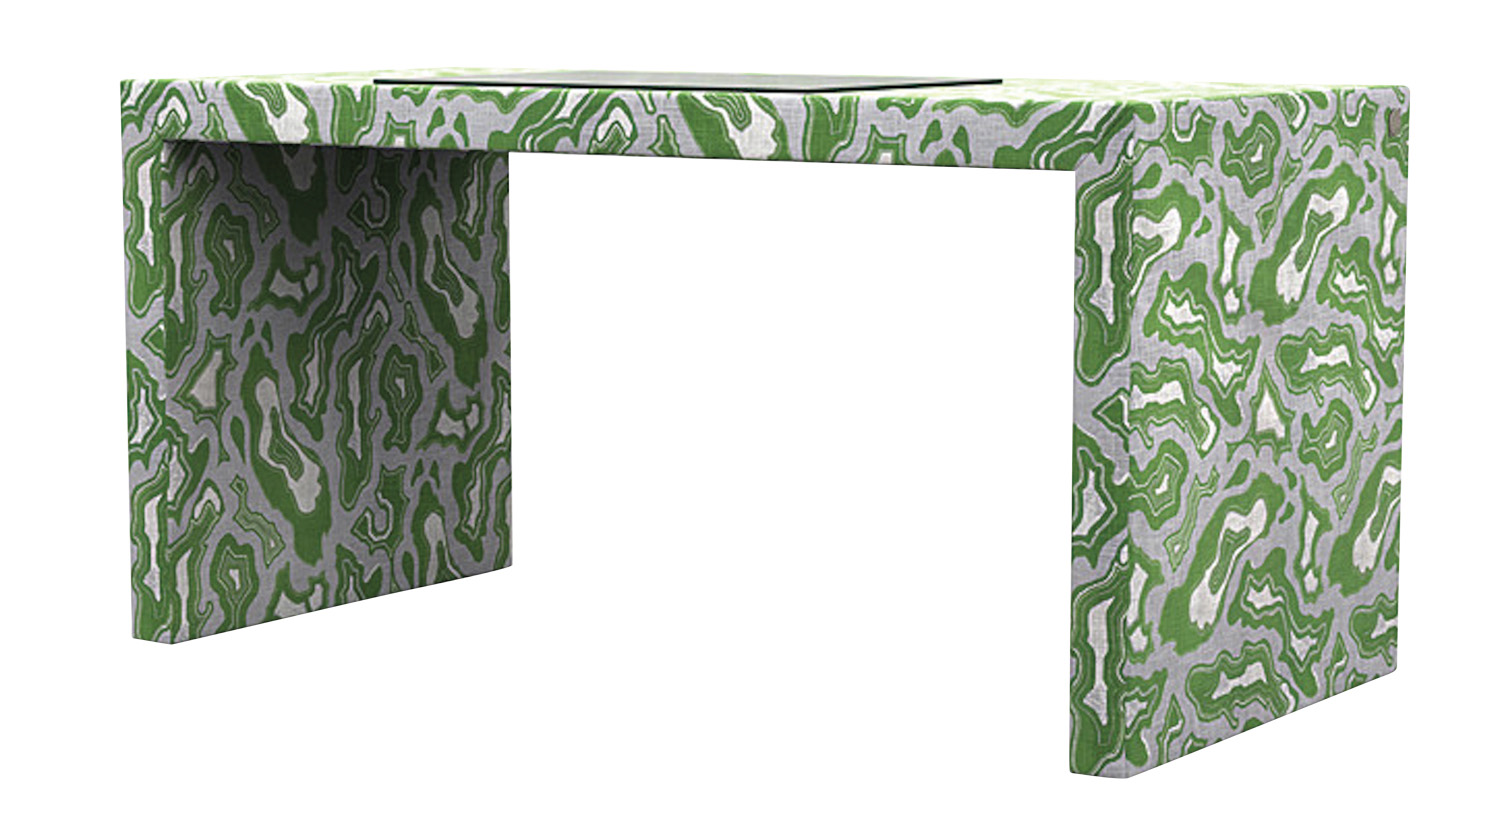 green table that's part of cat judice textiles colllab